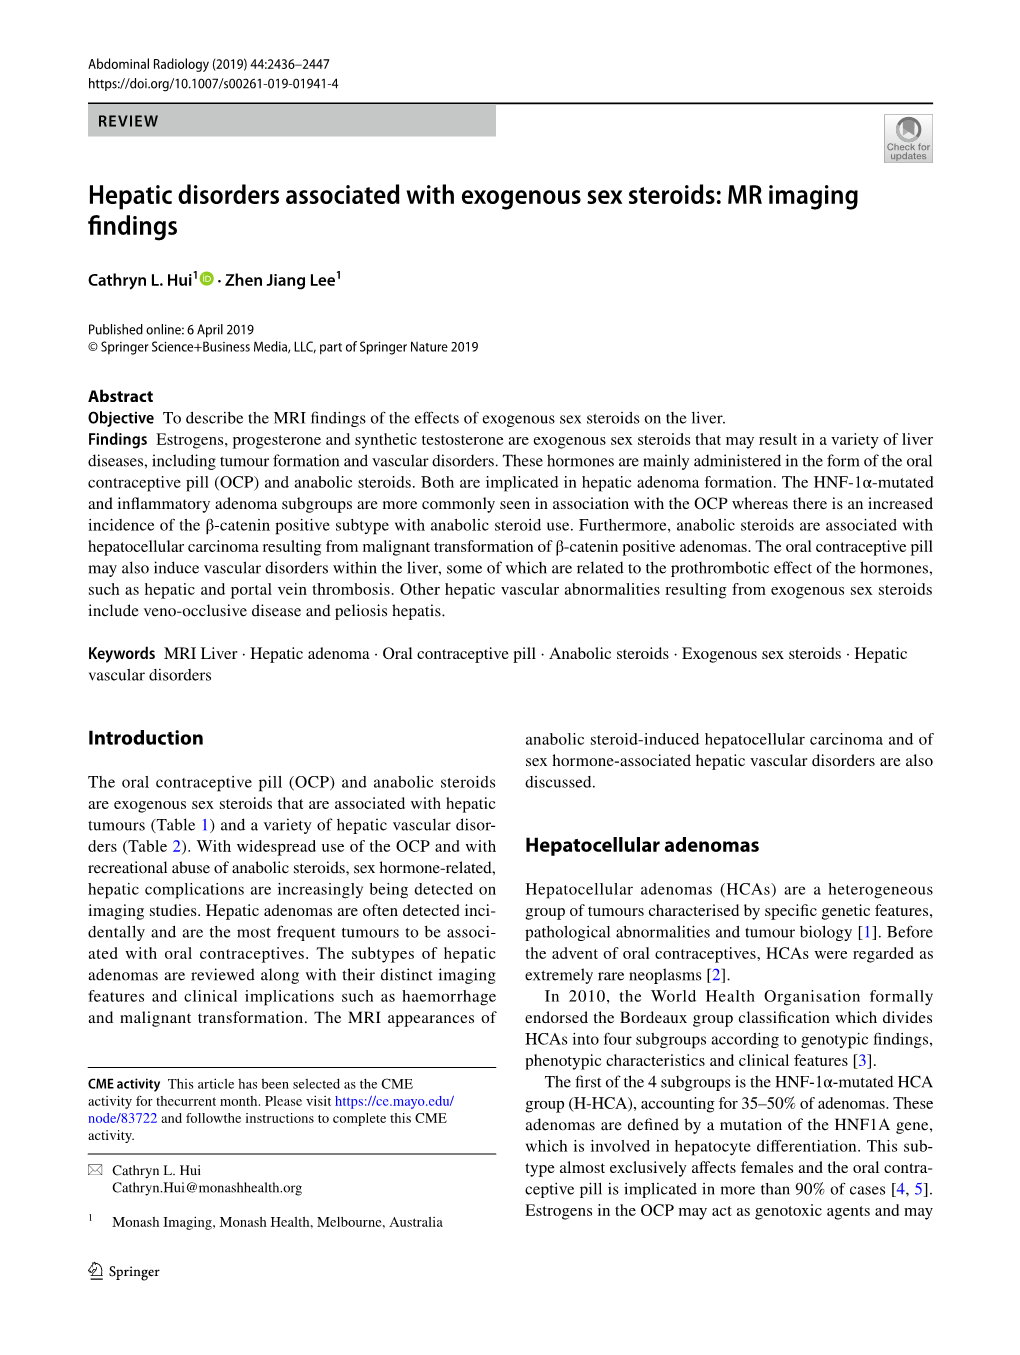 Hepatic Disorders Associated with Exogenous Sex Steroids: MR Imaging Fndings